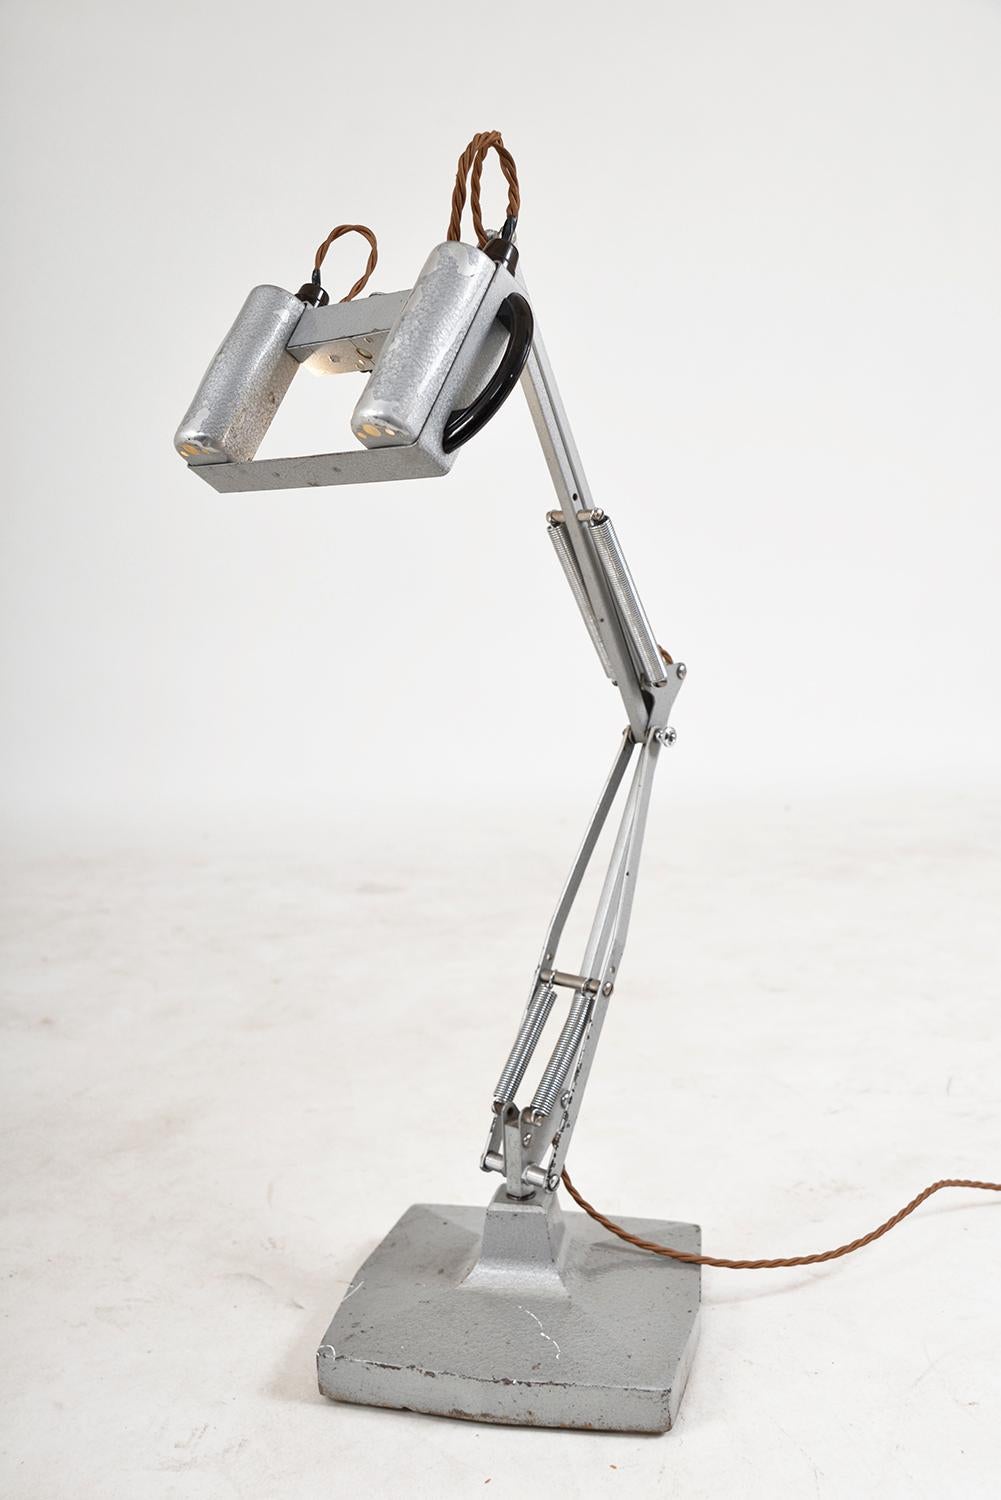 1940s Anglepoise Steel Industrial Lamp 1431 by Herbert Terry & Sons Ltd, England 1